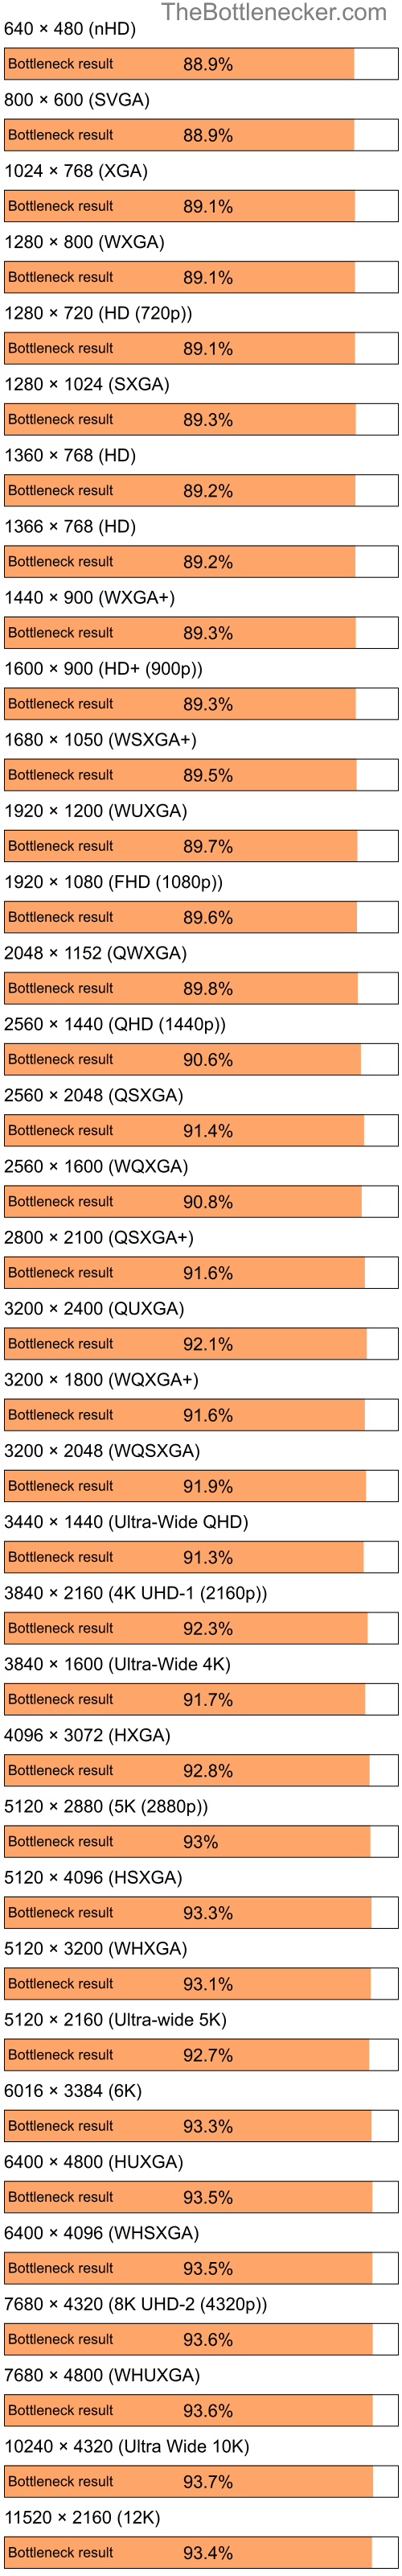 Bottleneck results by resolution for Intel Pentium 4 and NVIDIA GeForce3 Ti 200 in General Tasks